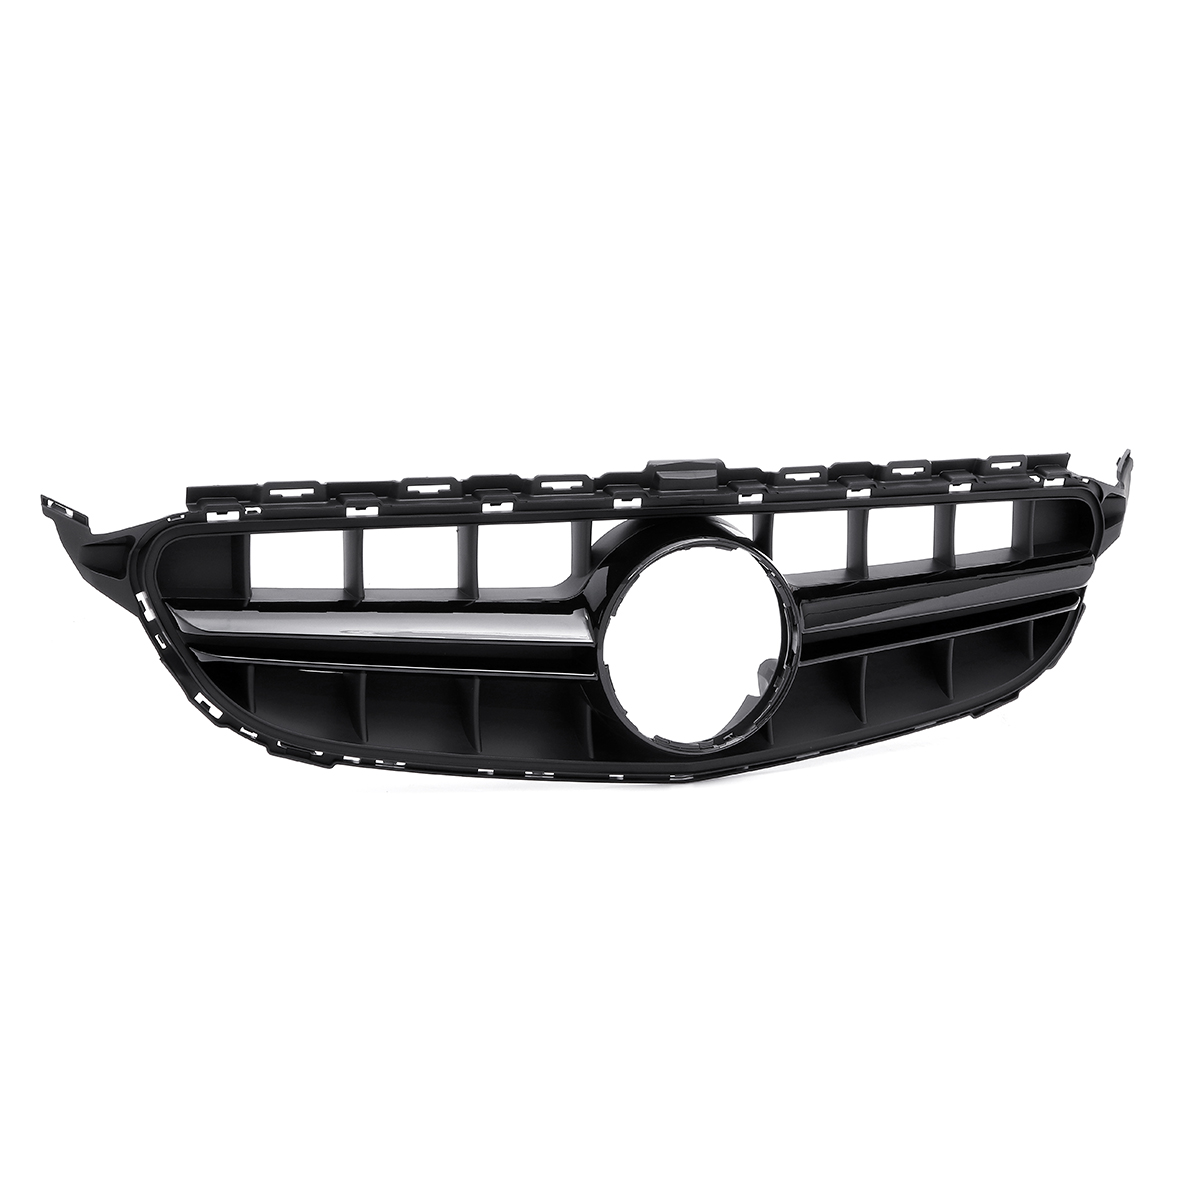 

AMG Style Grille Grill for Mercedes Benz C Class W205 2015-18